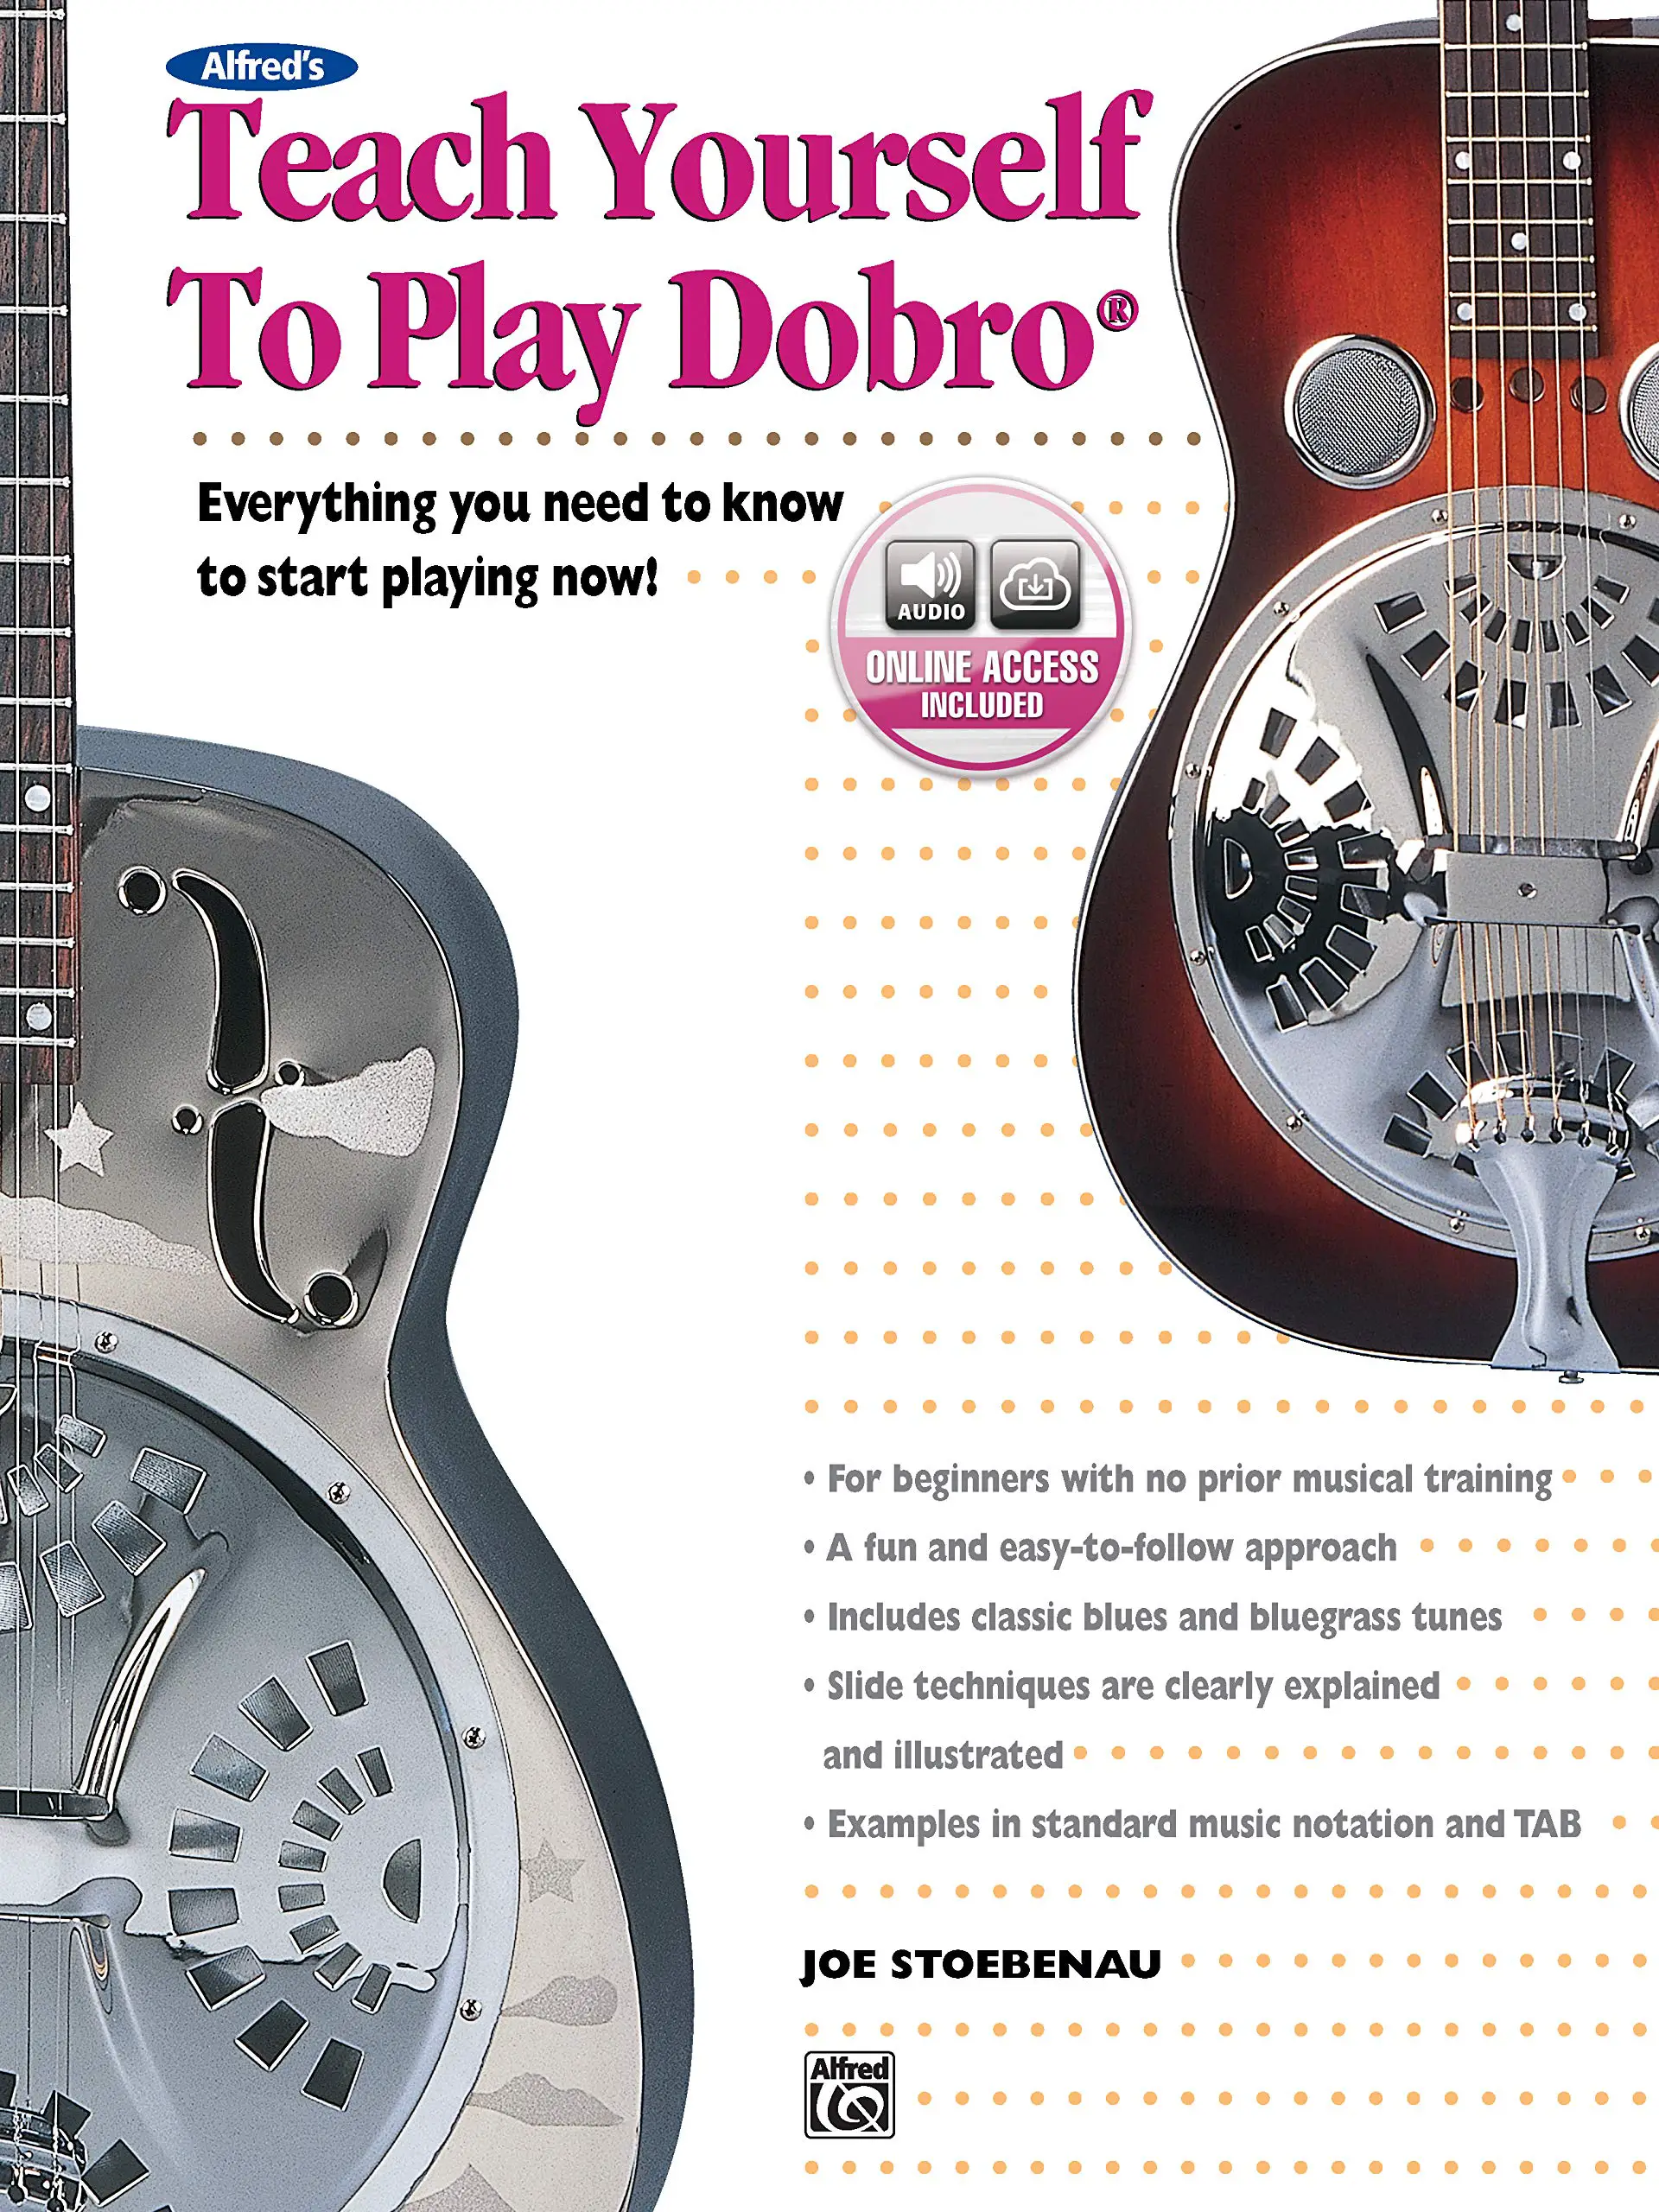 Tips For Learning To Play Dobro